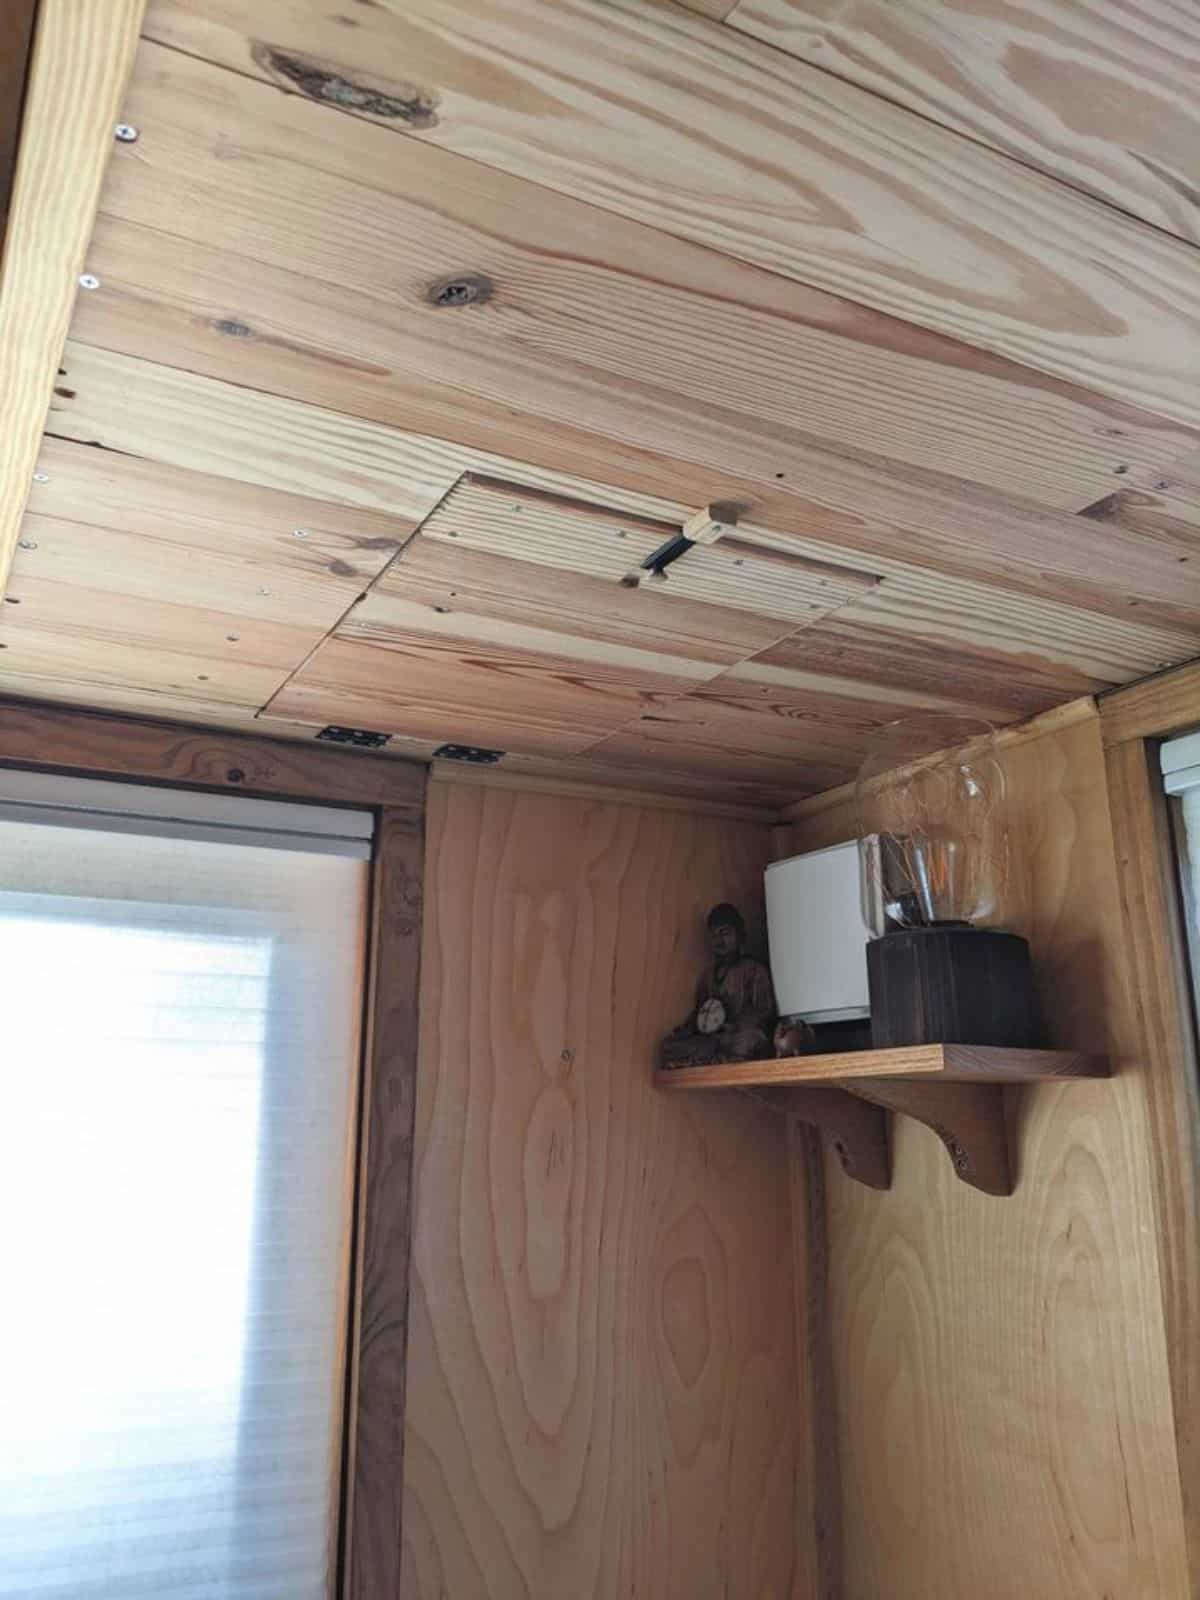 Wooden walls of 24’ One Bedroom Tiny House